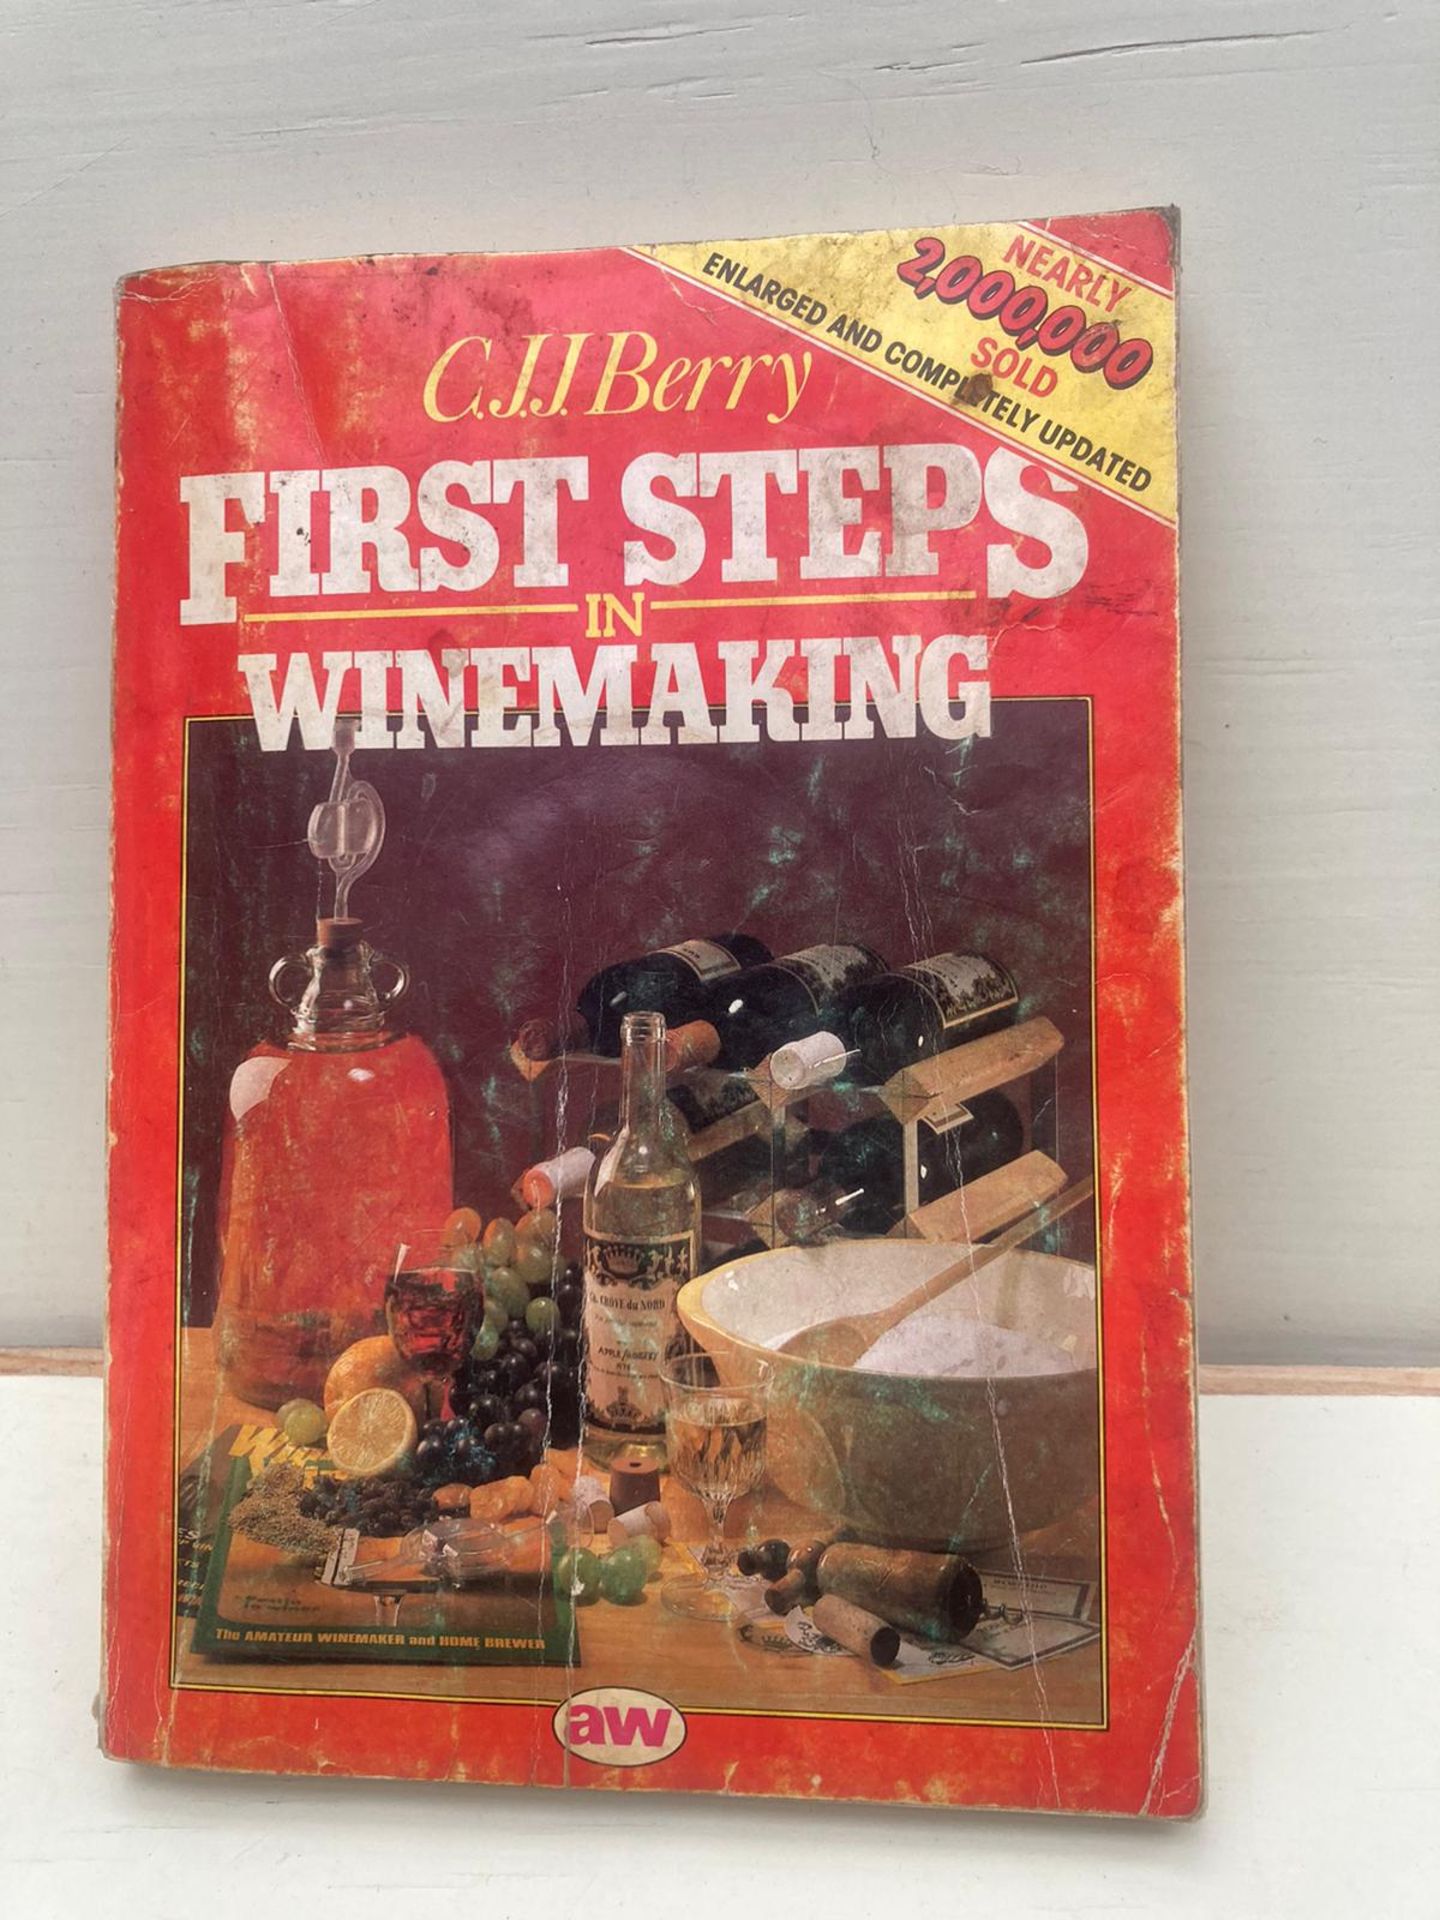 C.J.J Berry First steps in Winemaking 1983